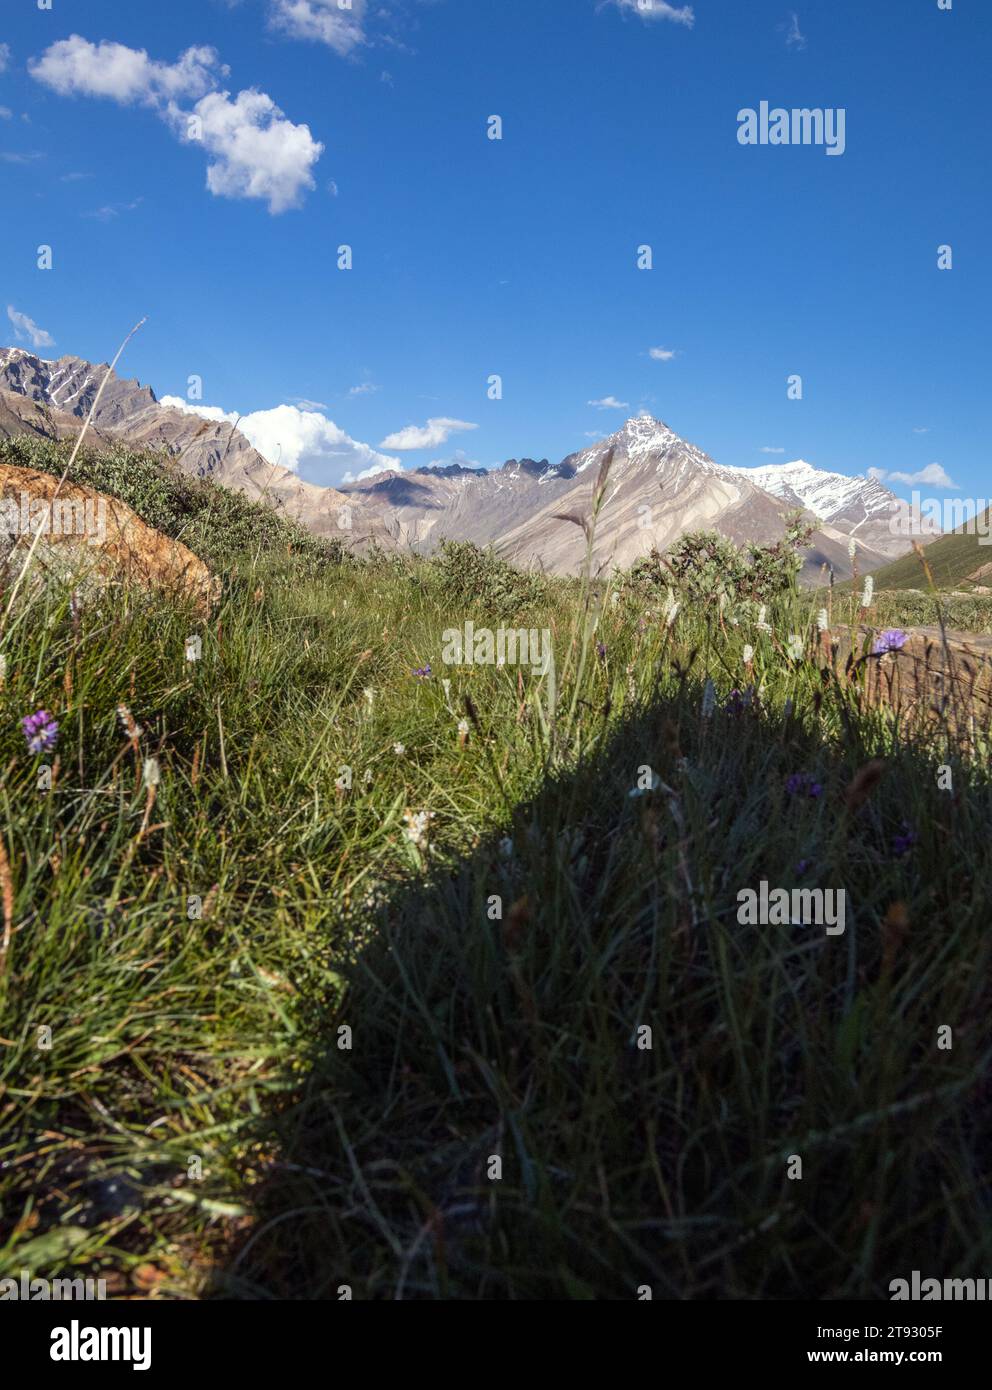 Landscape photo of a snow capped peak with lot of green grass and blue flowers in the foreground. Stock Photo